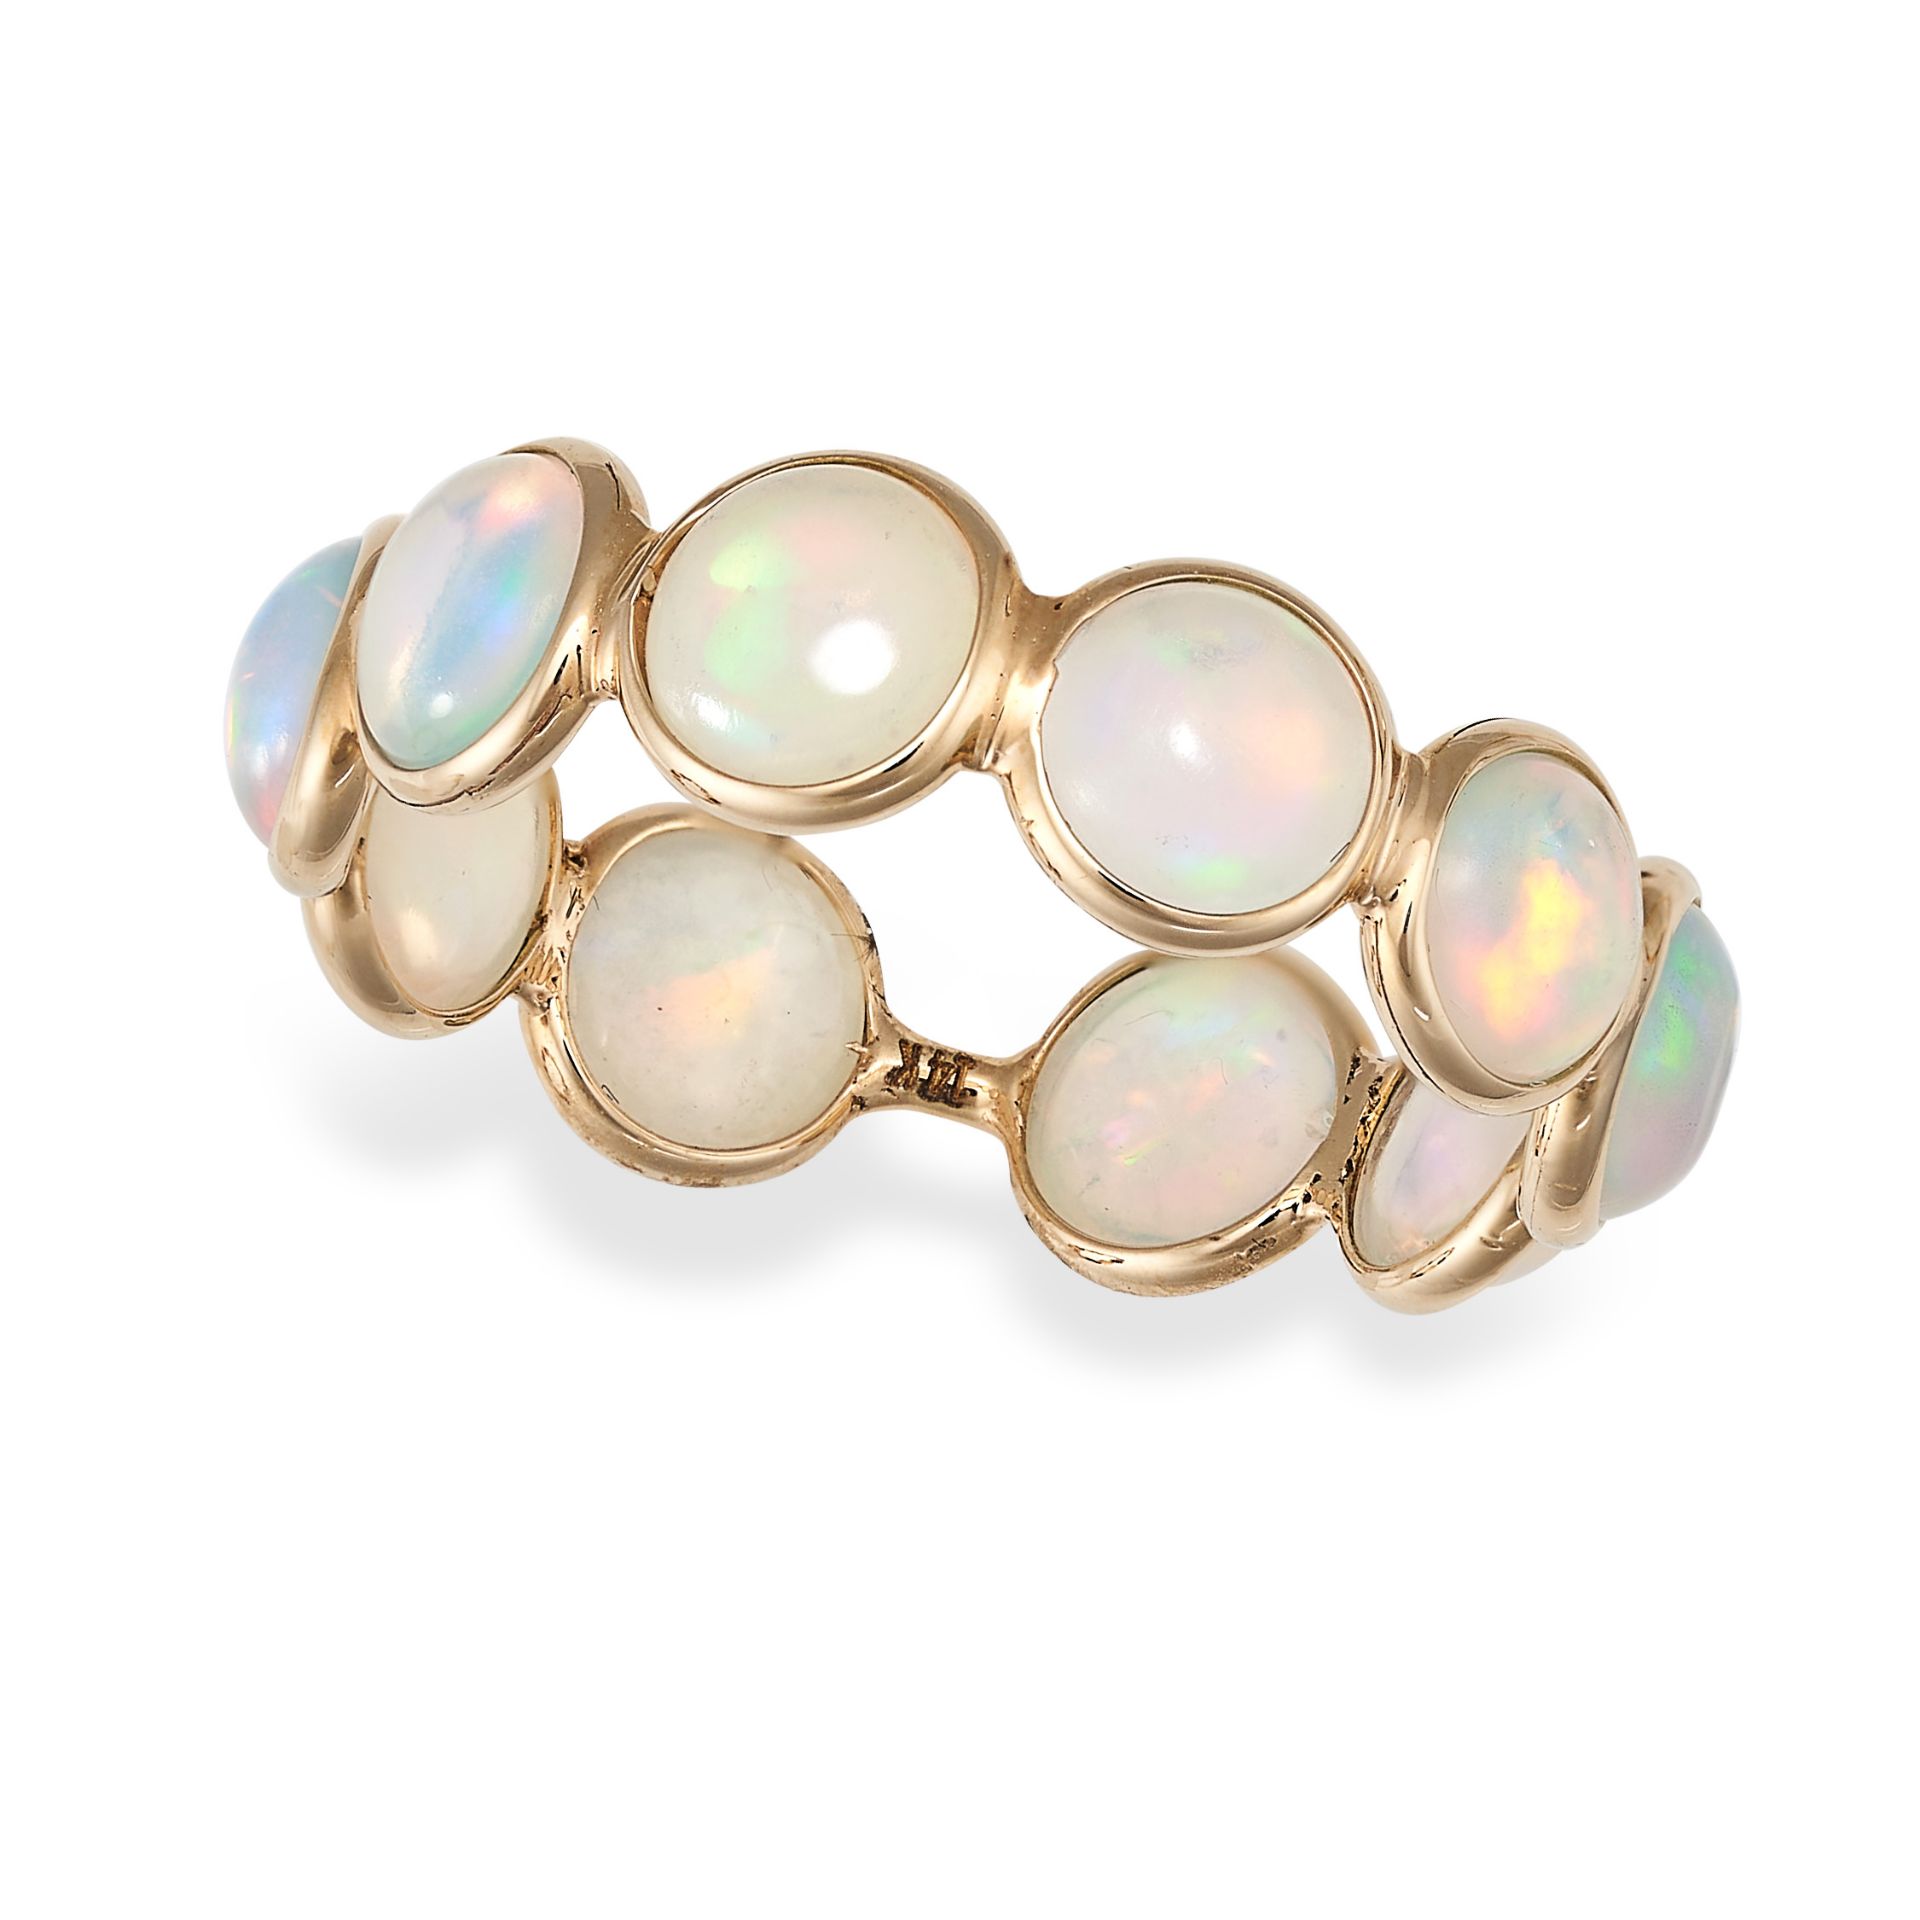 AN OPAL ETERNITY BAND RING in 14ct yellow gold, set with a row of round cabochon opals, stamped 1...